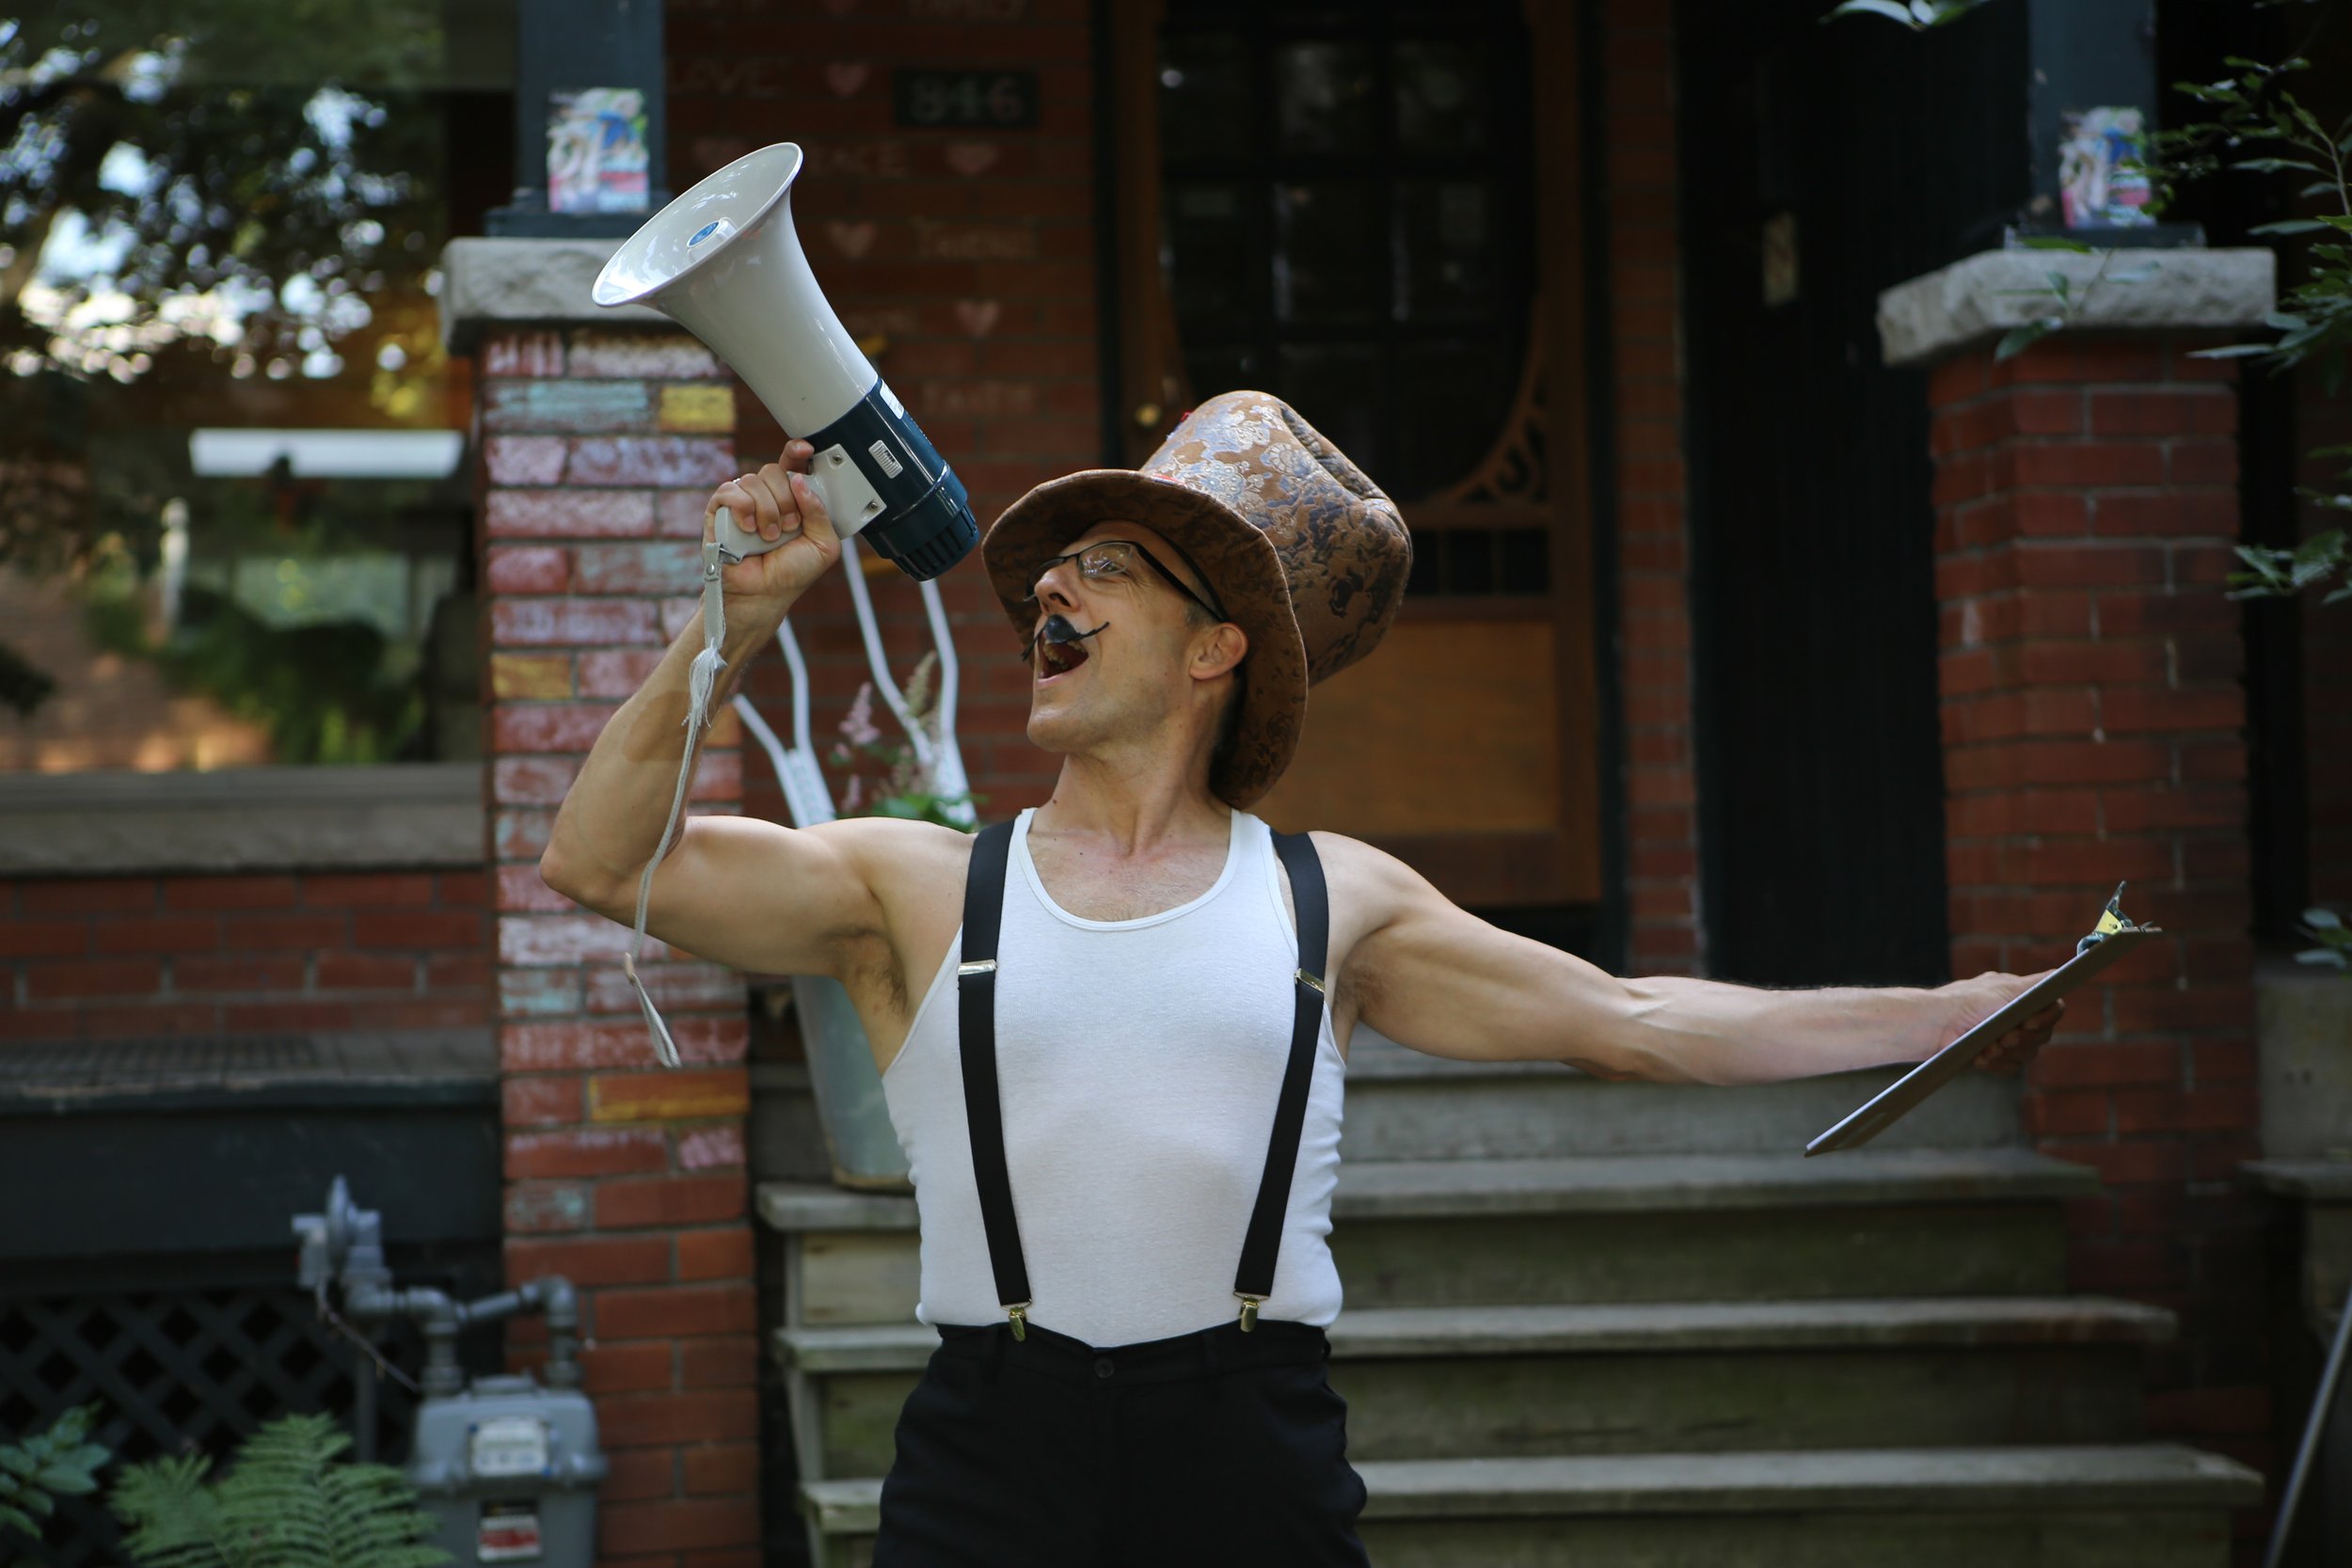 Man yelling into a megaphone, while holding a clipboard